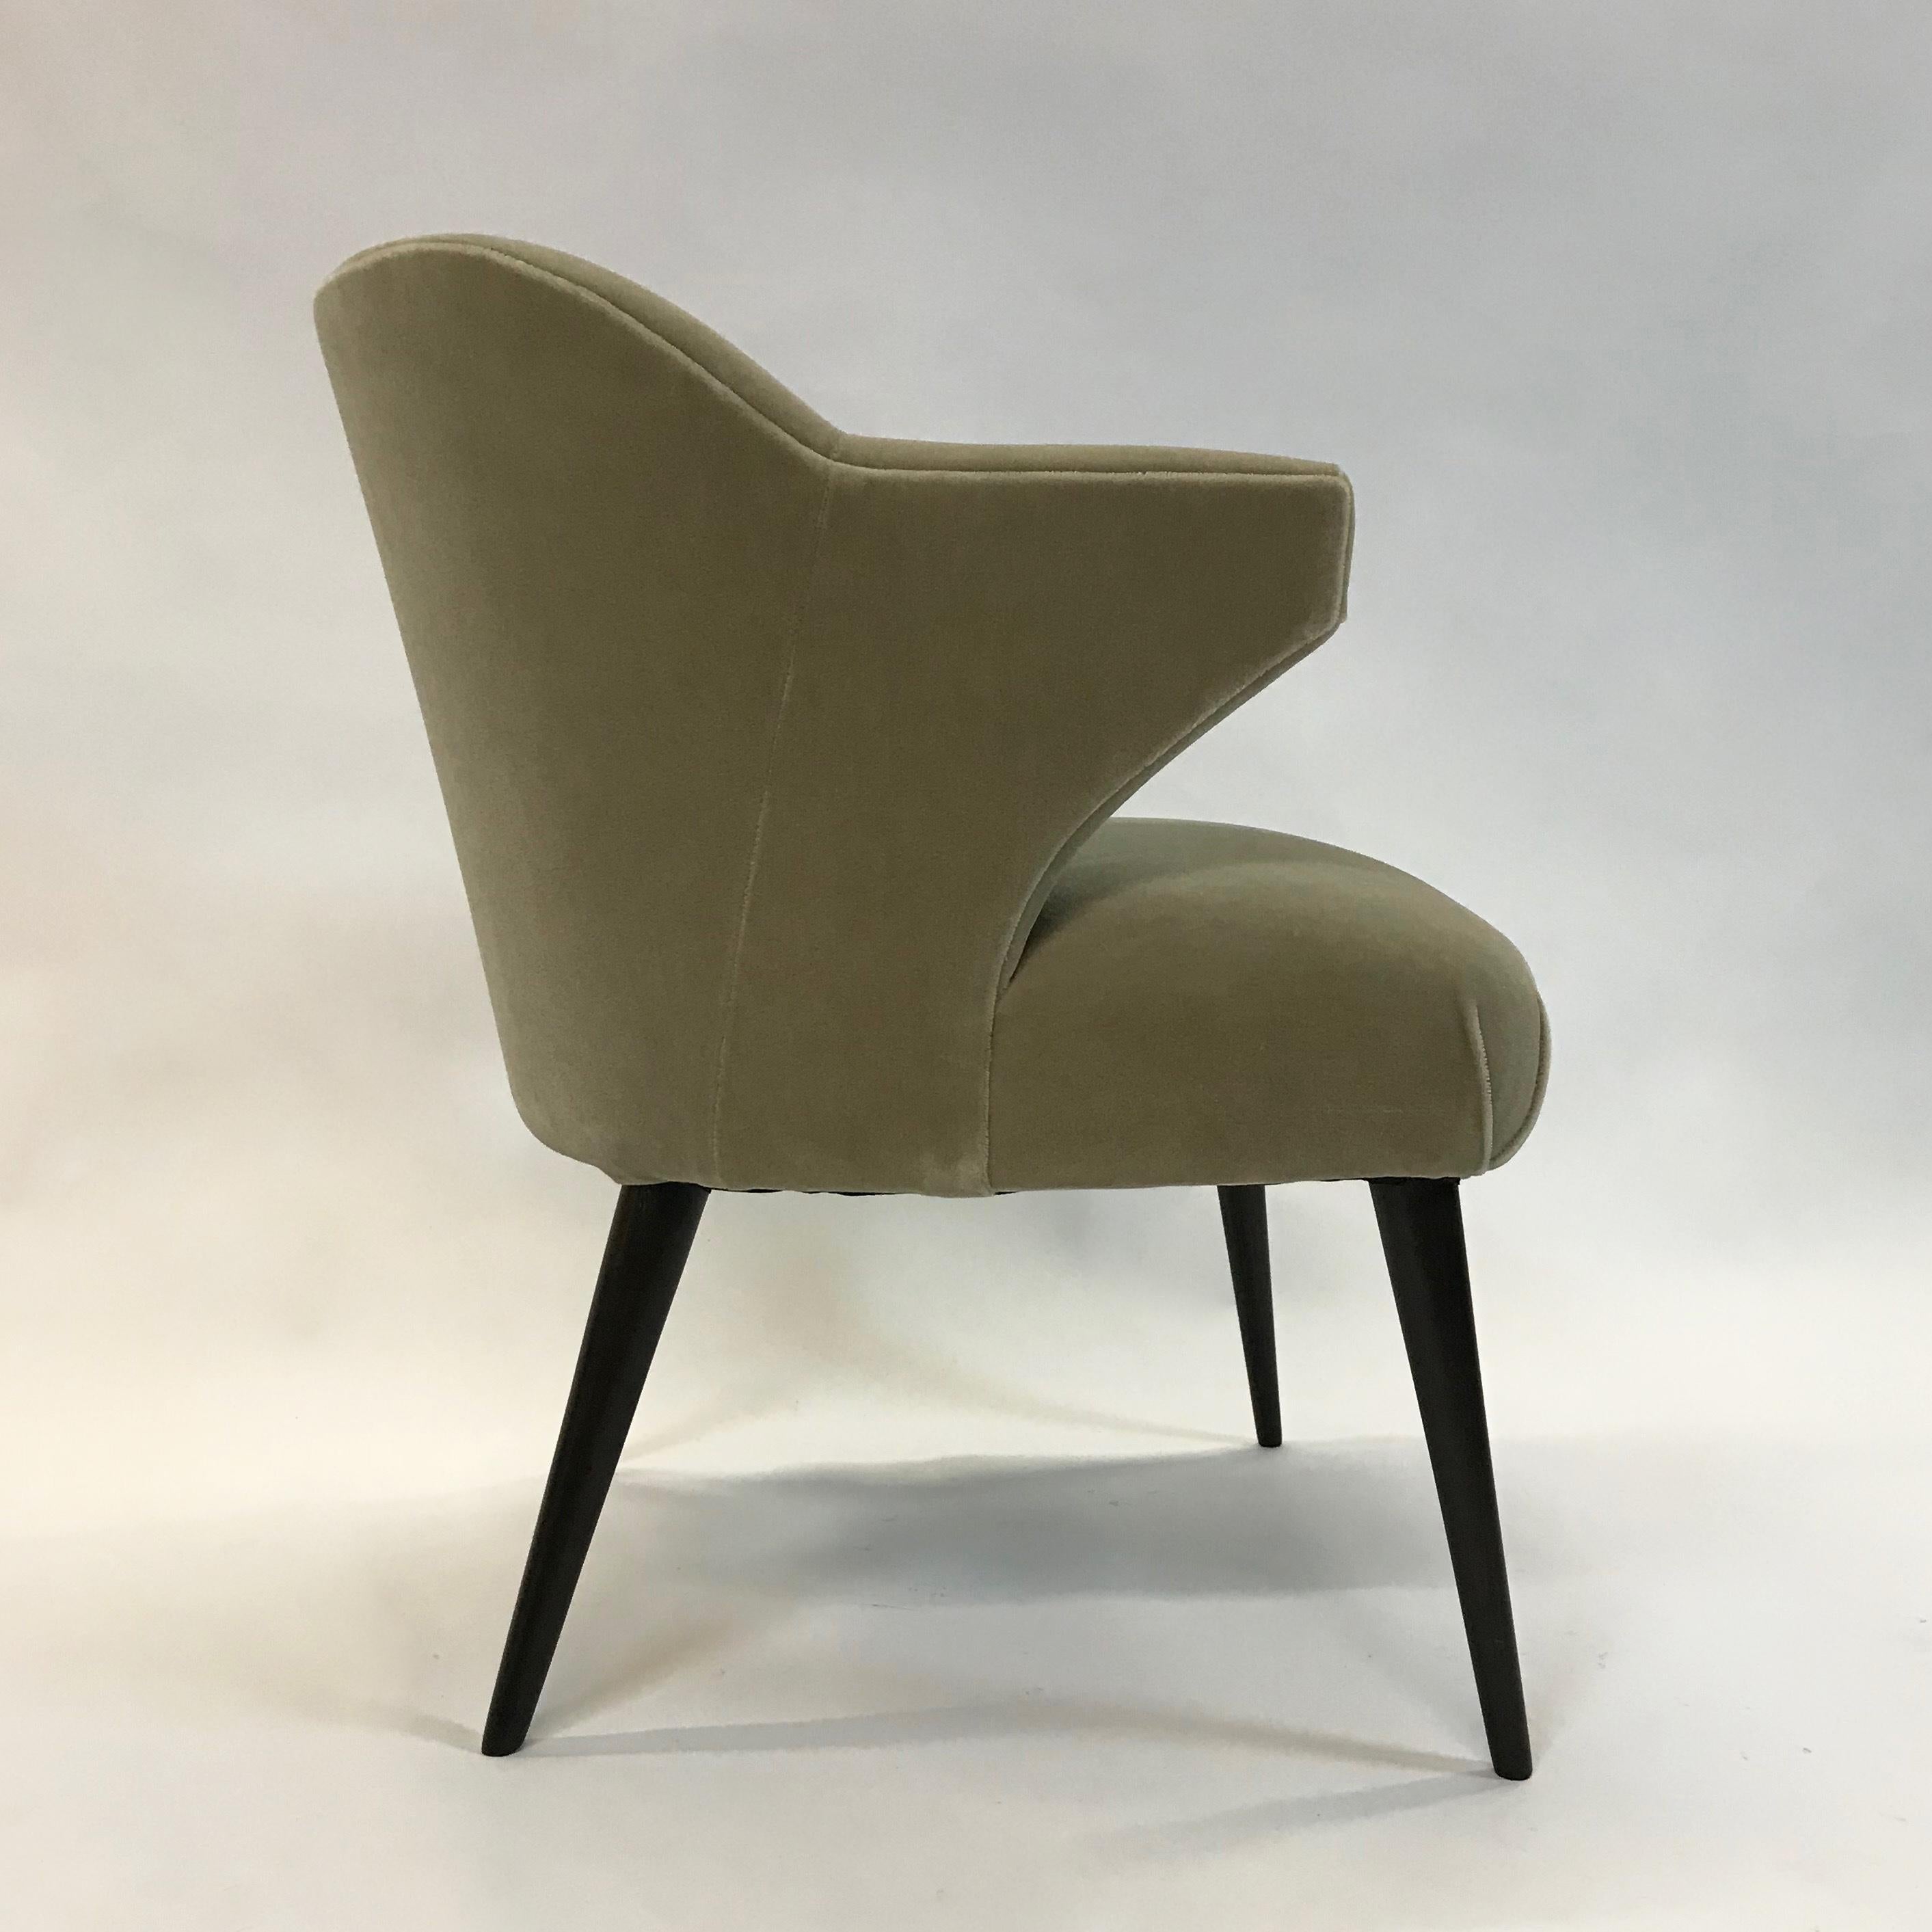 Stylish. Mid-Century Modern, wing arm, armchair is newly upholstered in a muted moss green mohair.